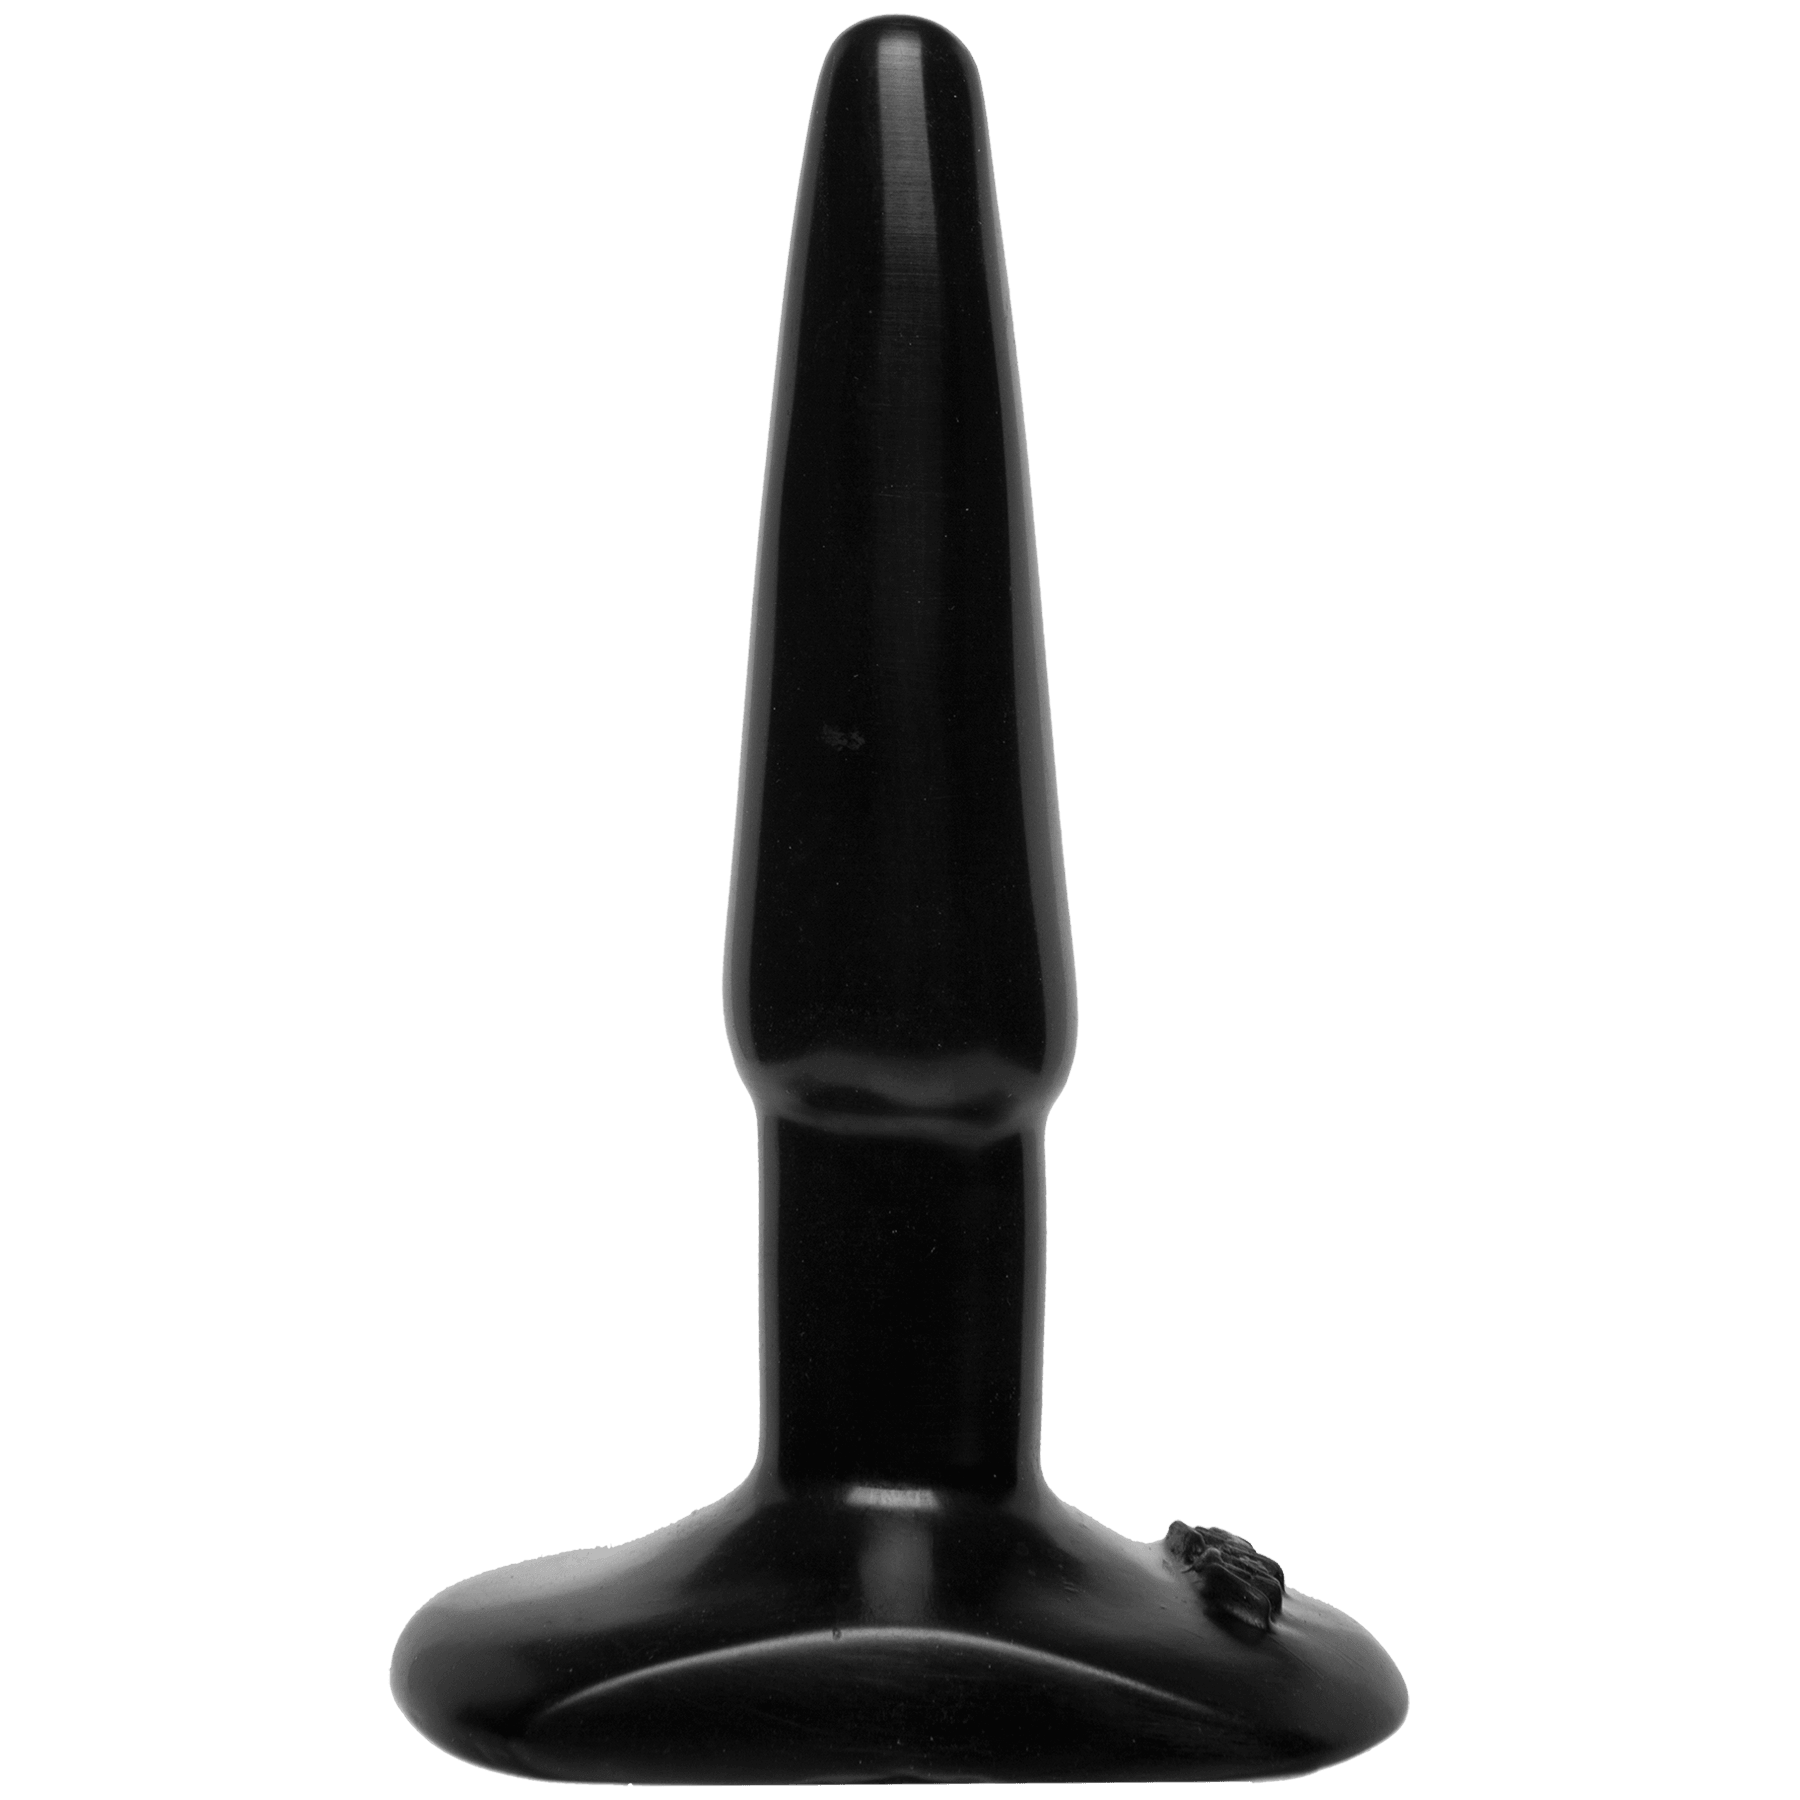 Doc Johnson Classic Smooth Butt Plug - Buy At Luxury Toy X - Free 3-Day Shipping